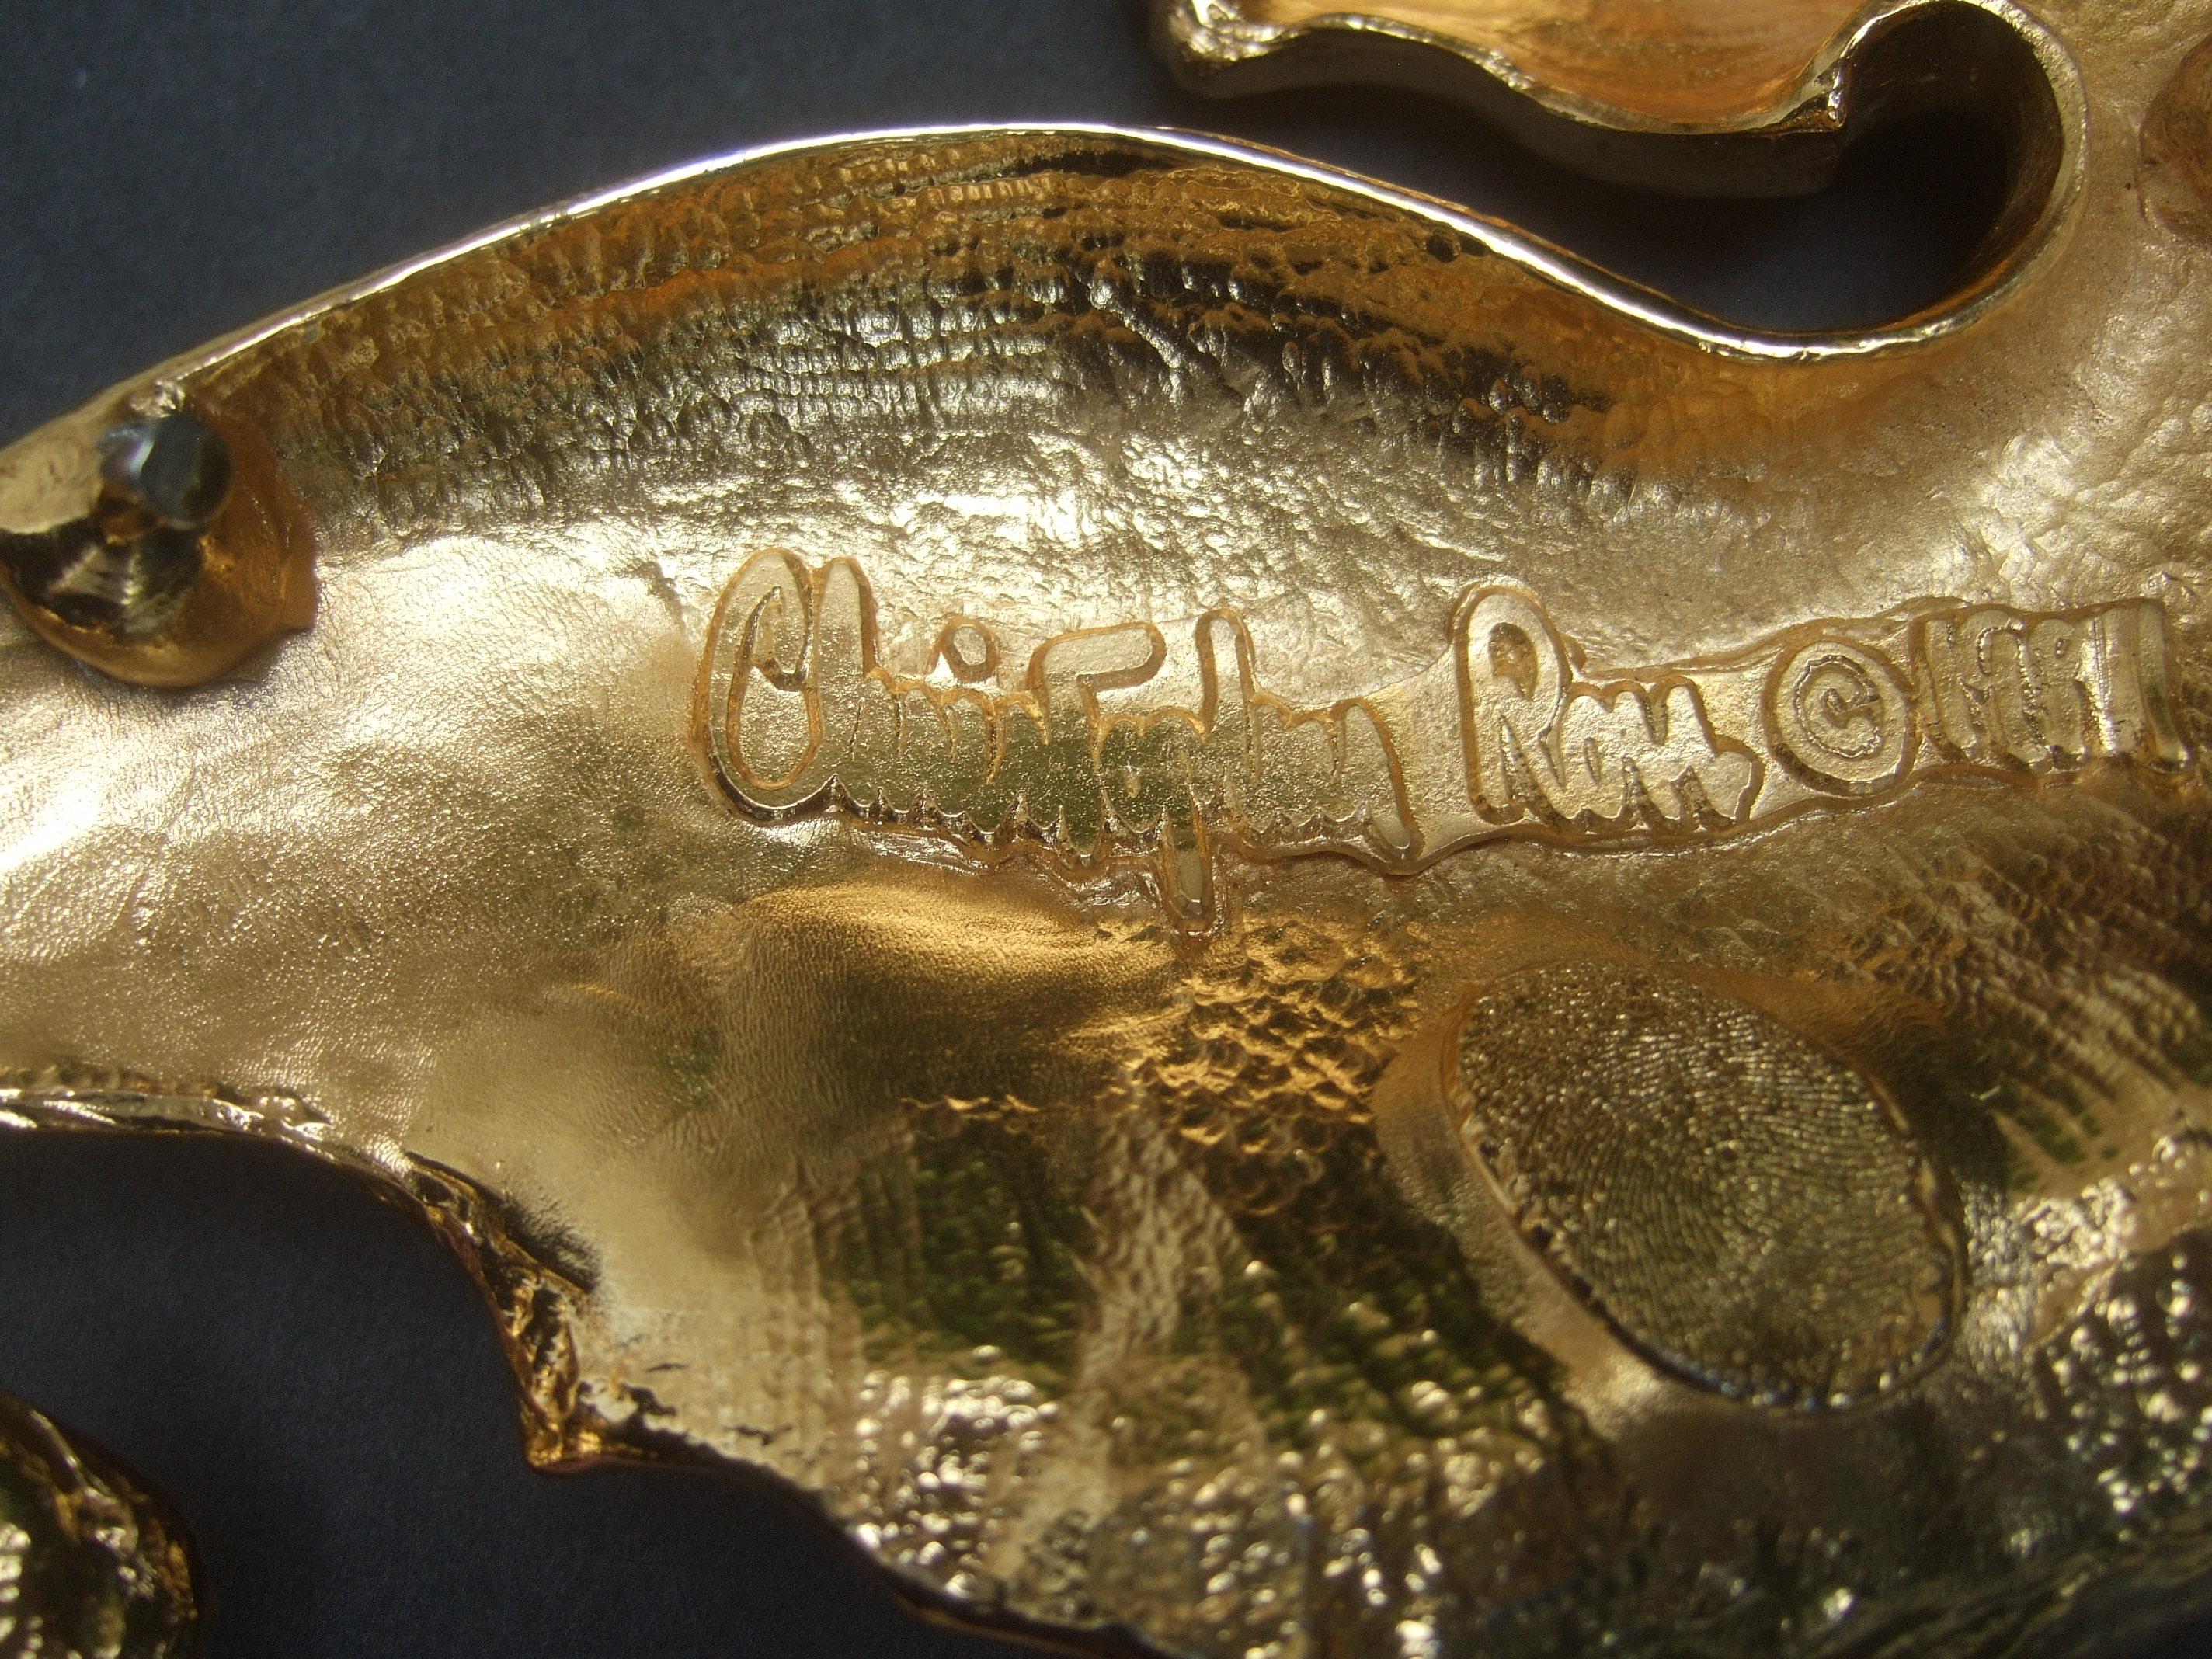 Christopher Ross Rare Massive 24k Gold Plated Seahorse Belt Buckle c 1980s For Sale 5